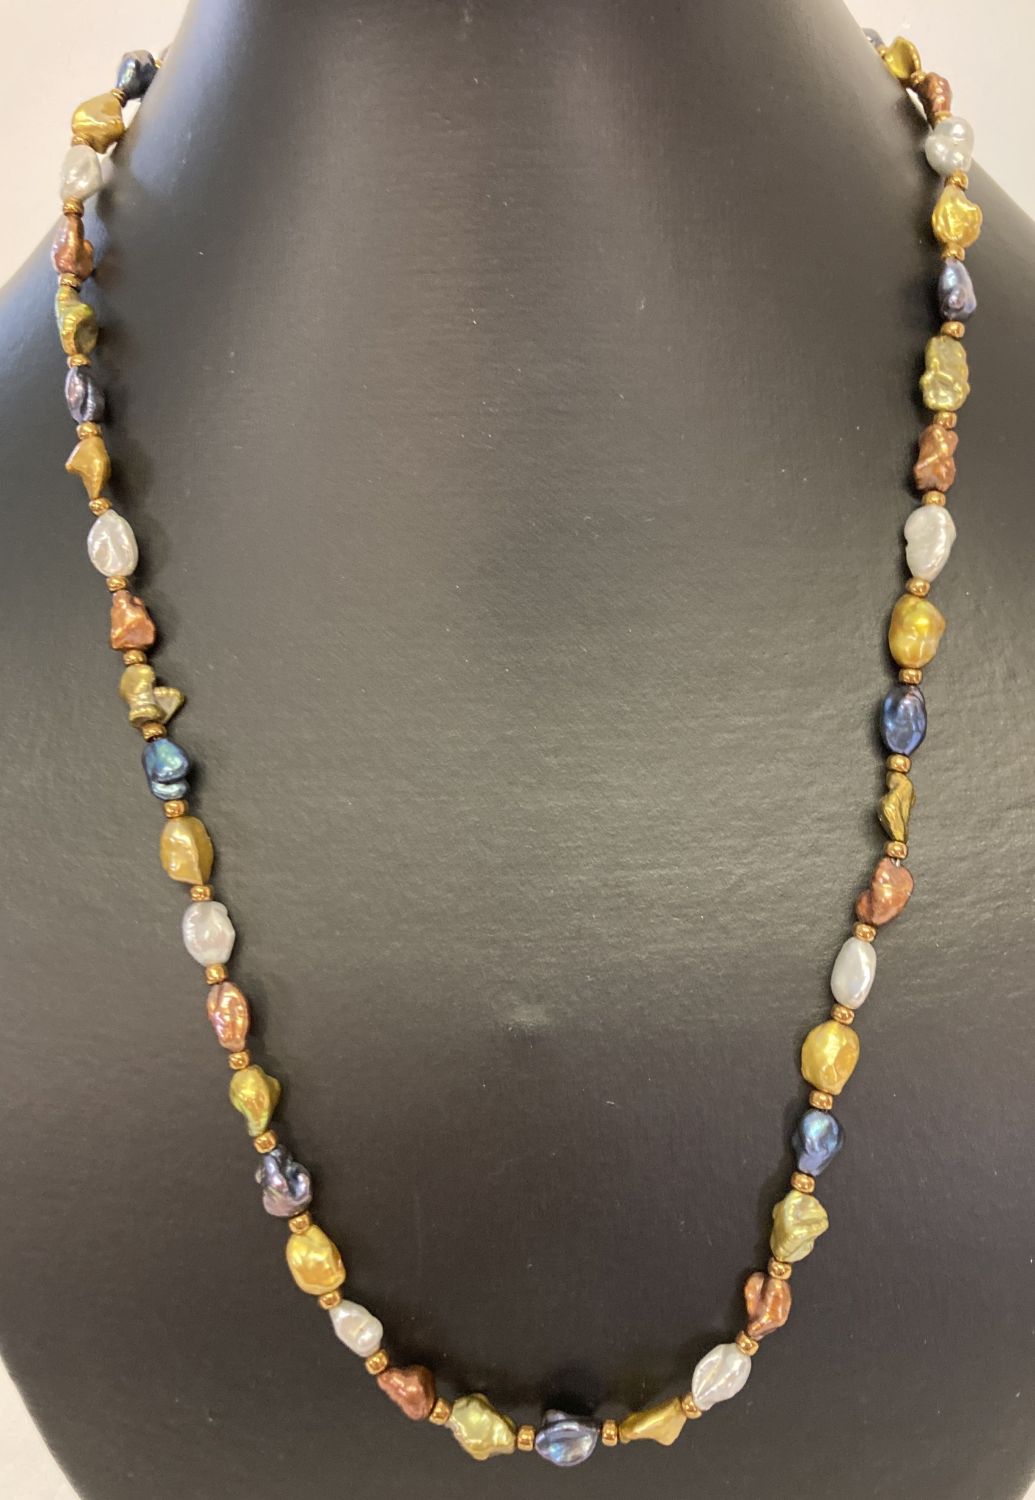 A 20" multicoloured freshwater pearl necklace with gold tone magnetic clasp.